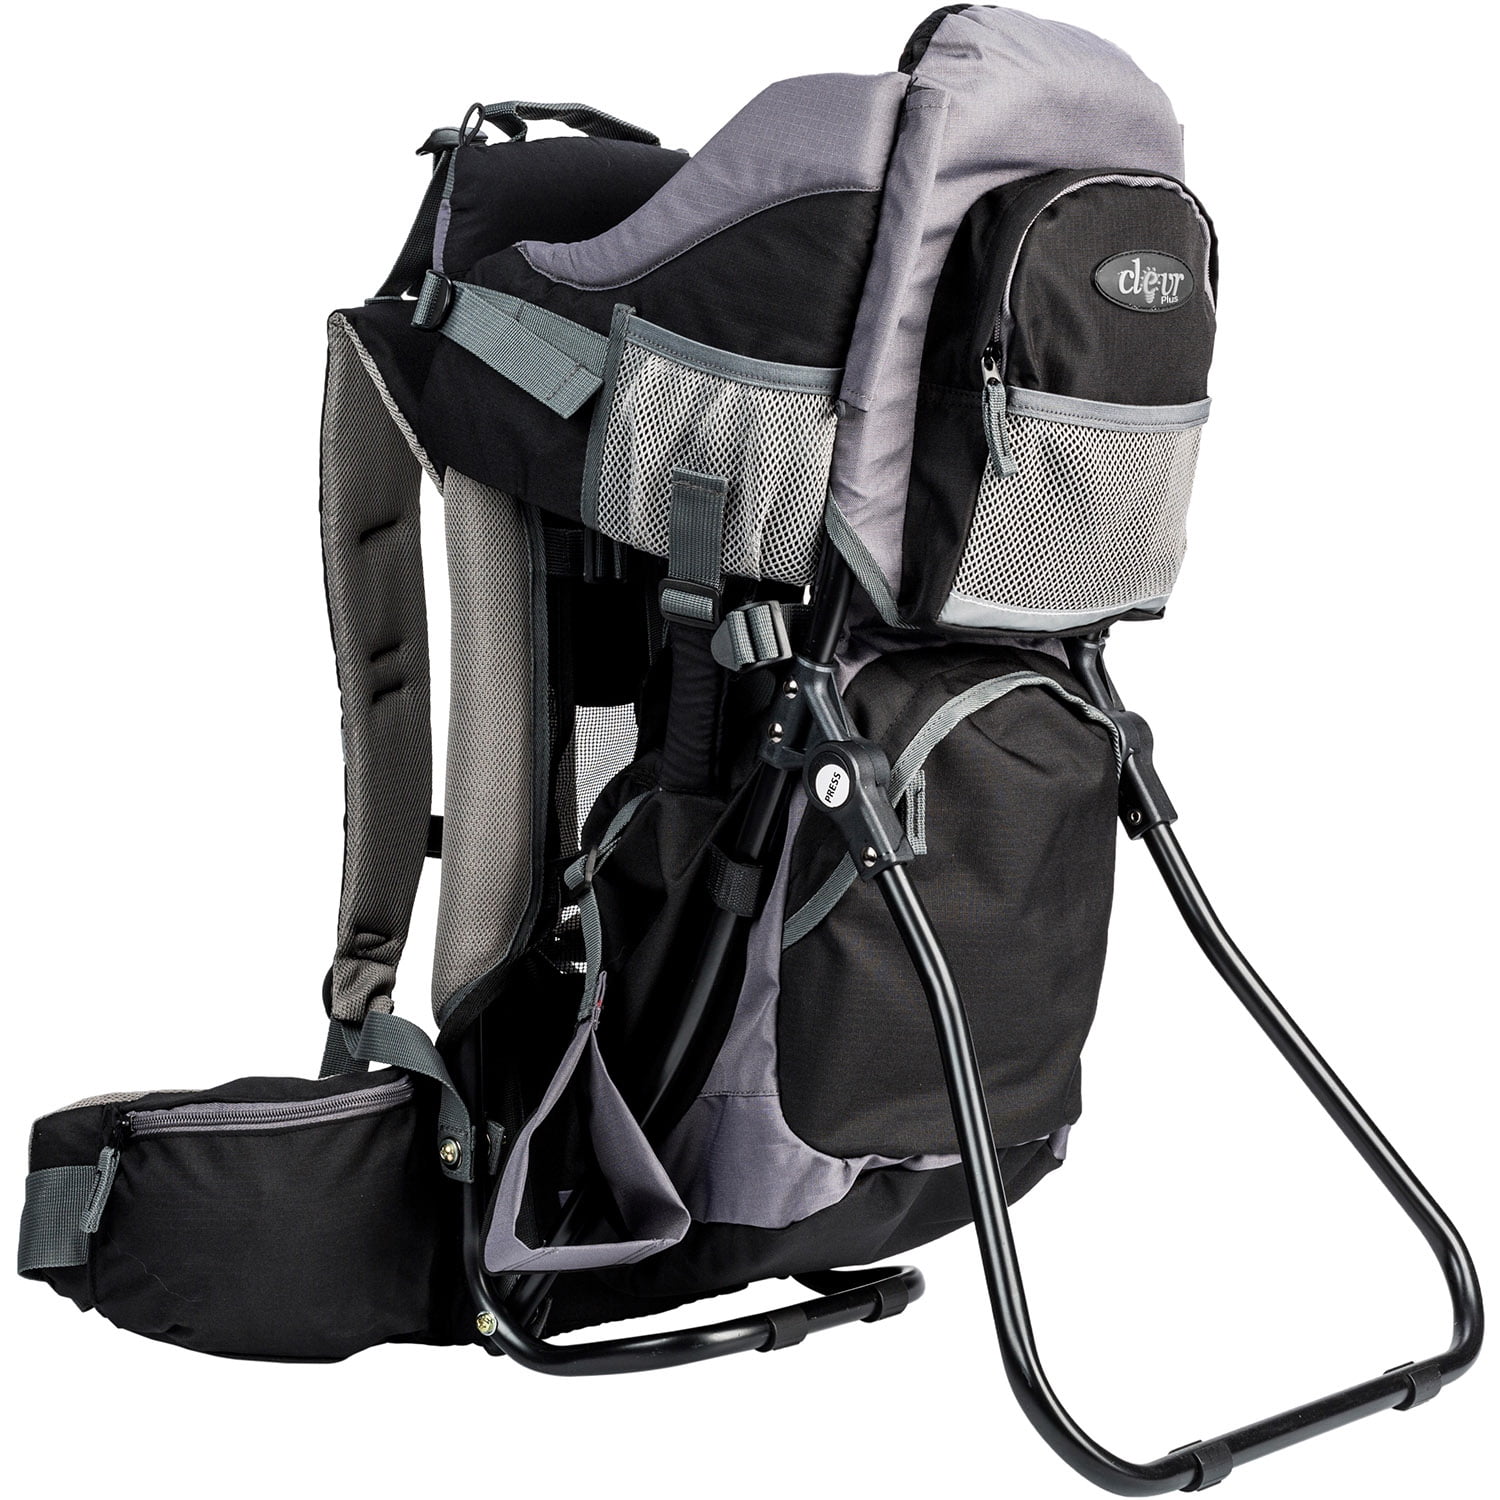 hiking child carrier